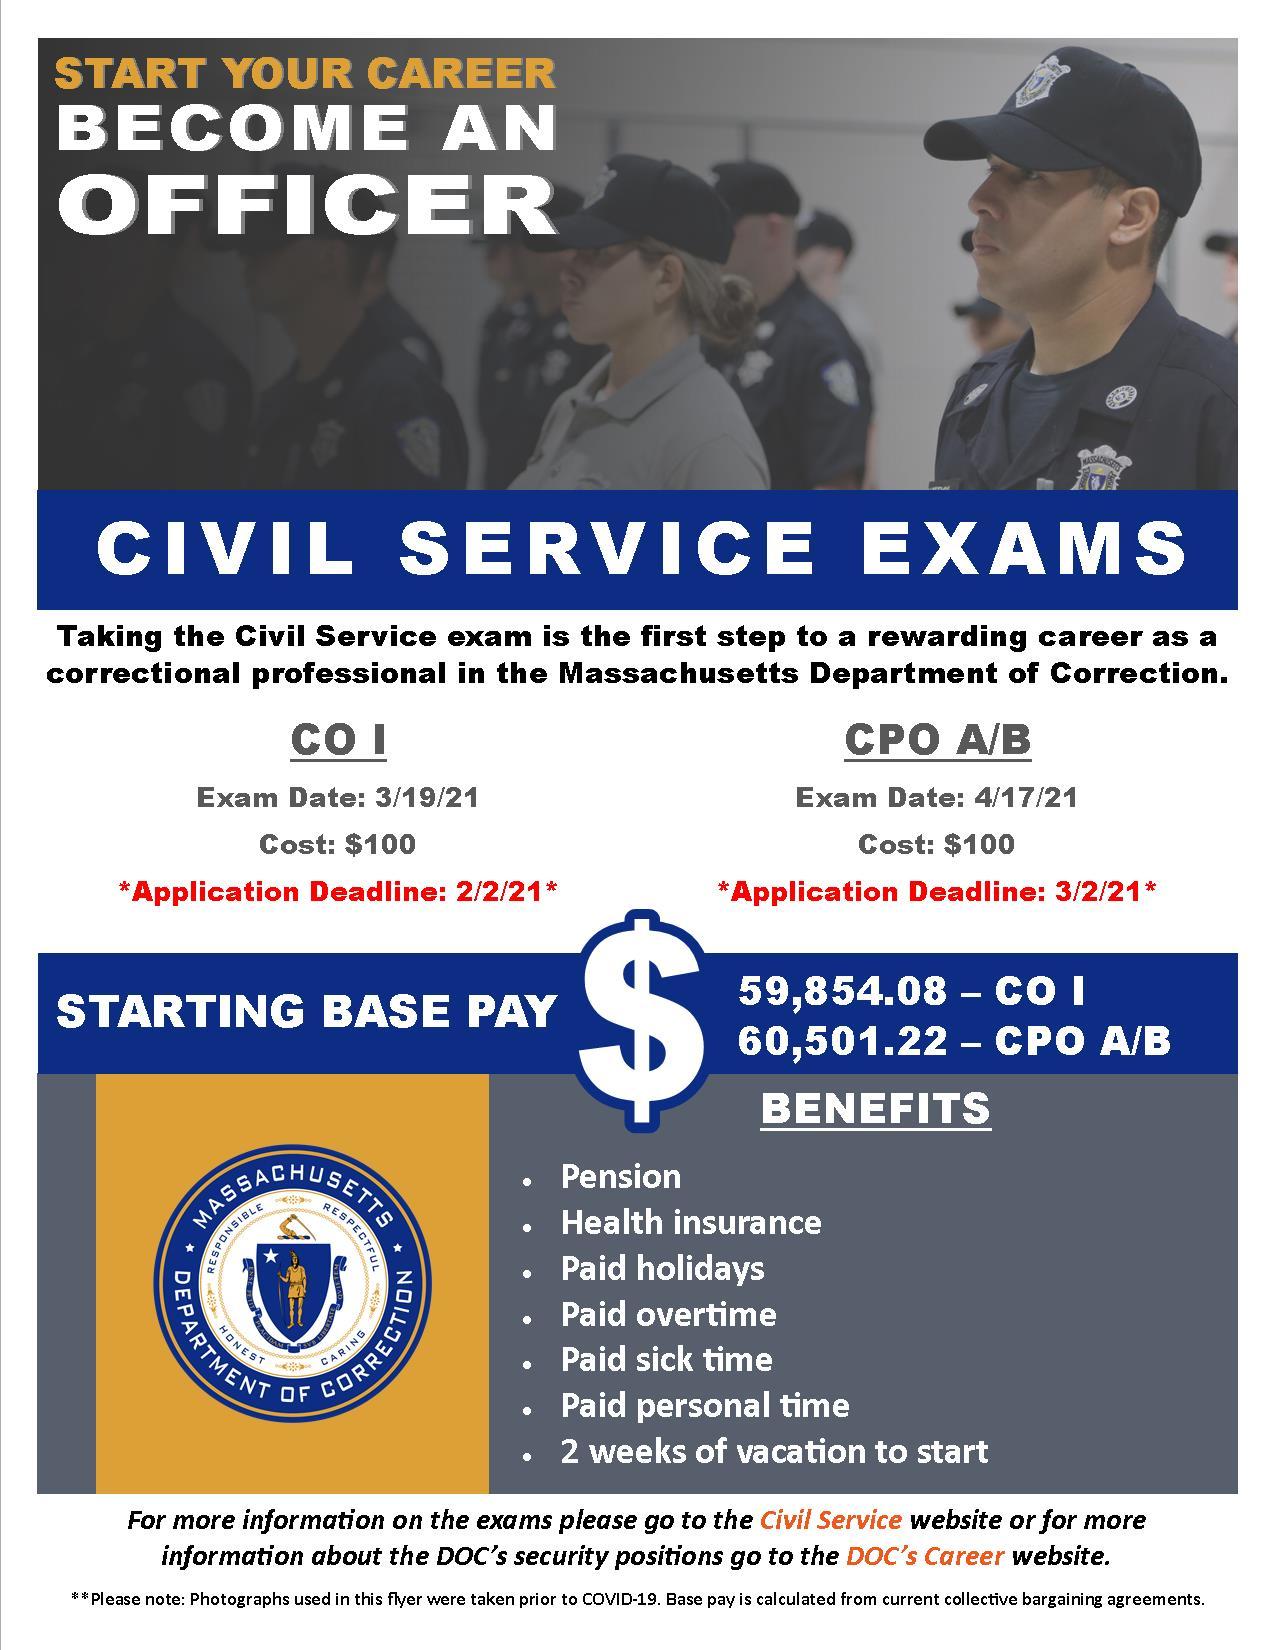 Flyer with info on civil service exams and base pay for CO and CPO positions